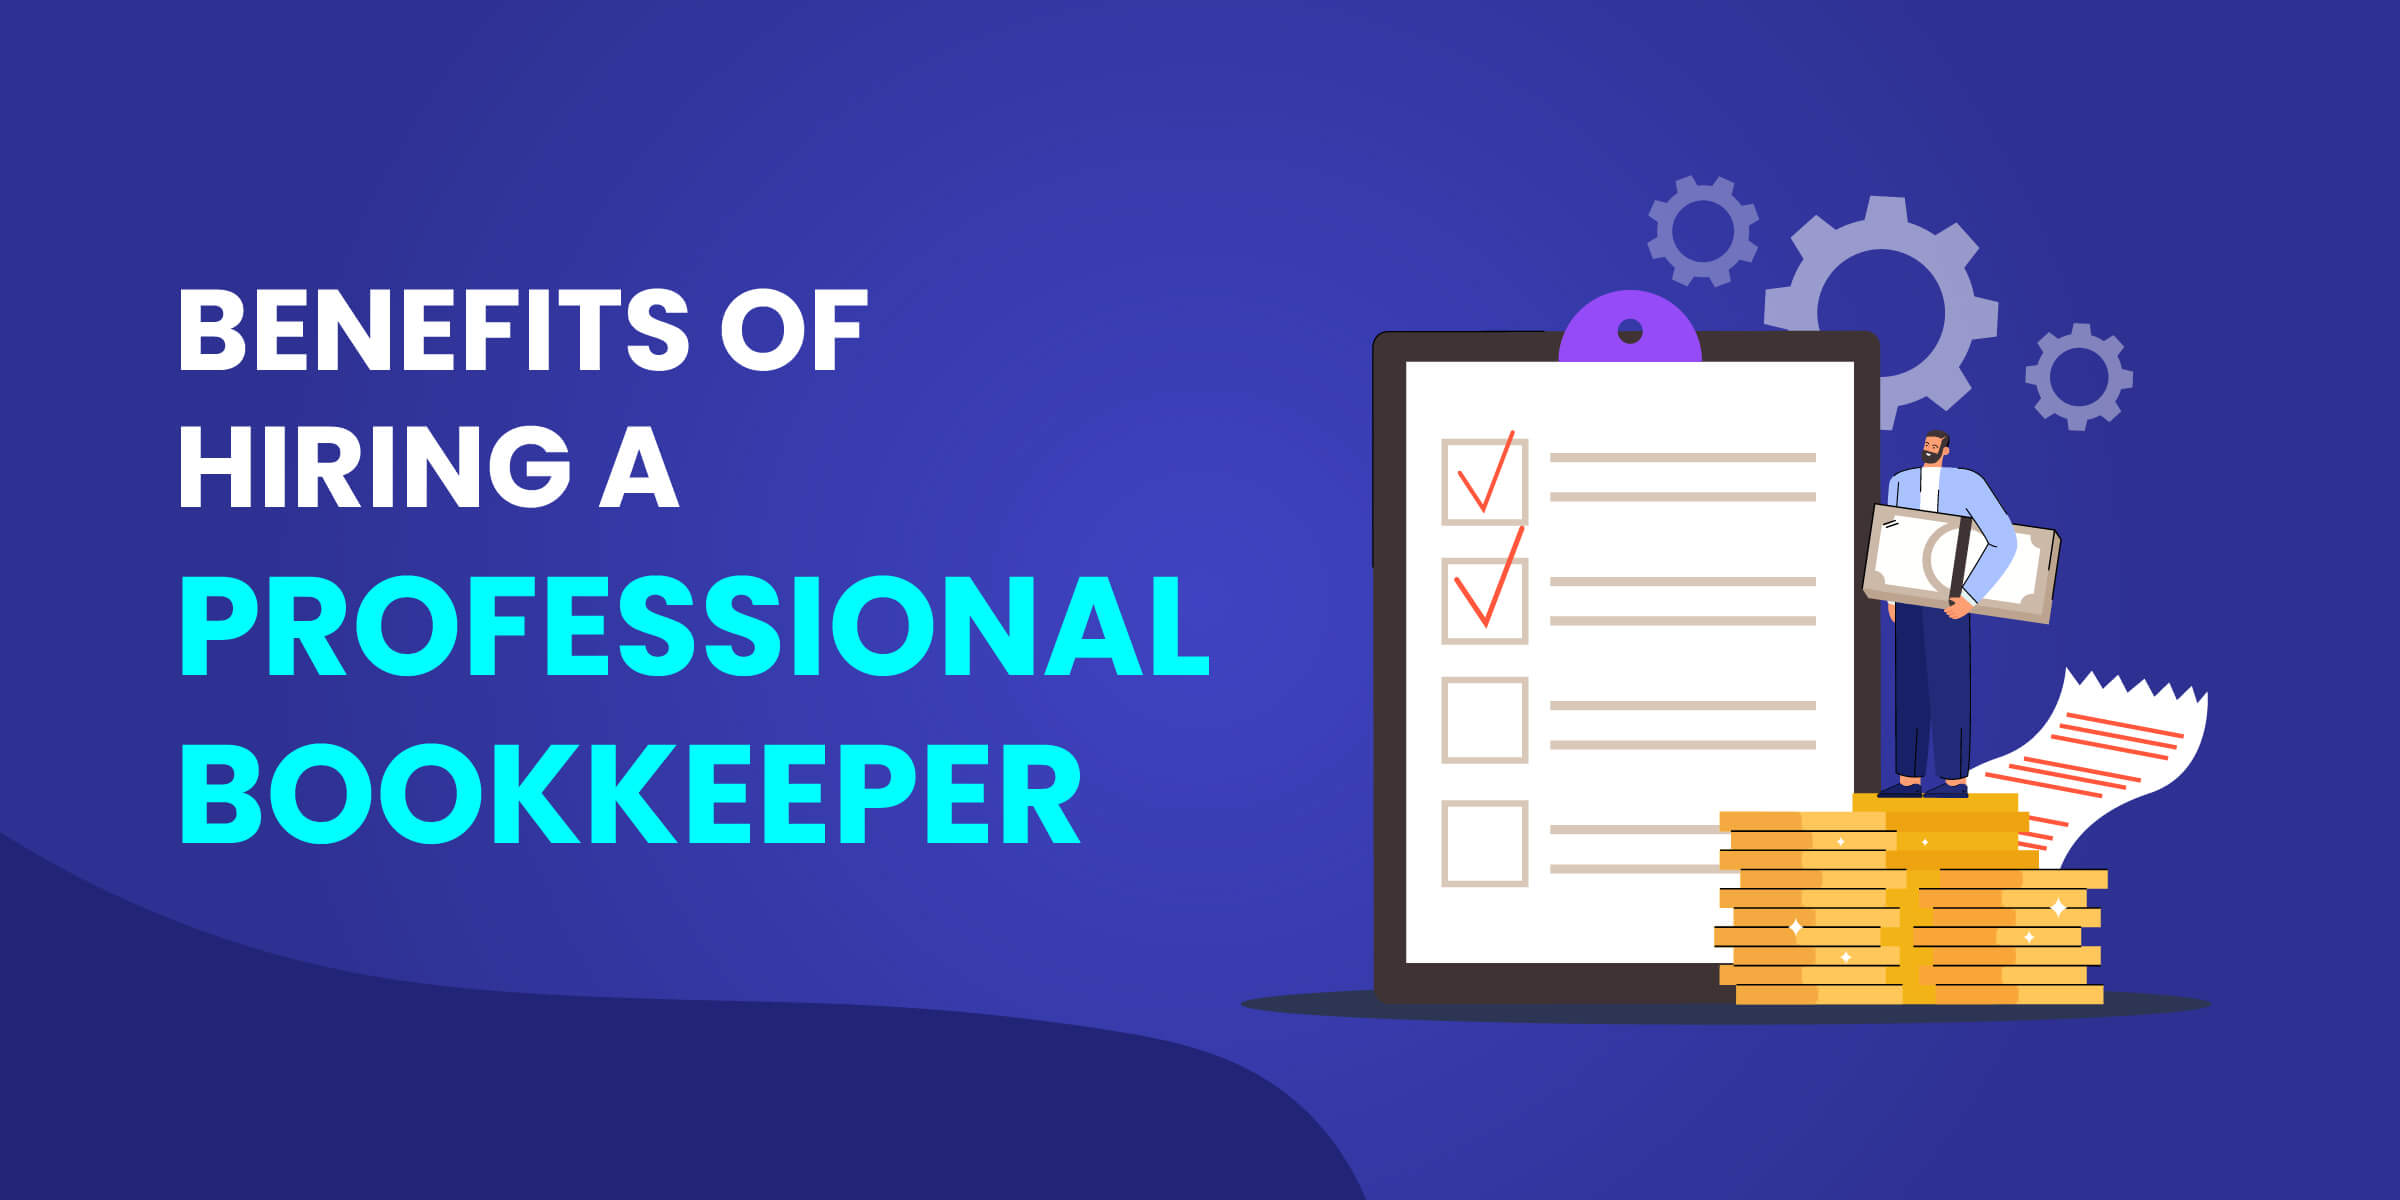 Benefits of Hiring a Professional Bookkeeper